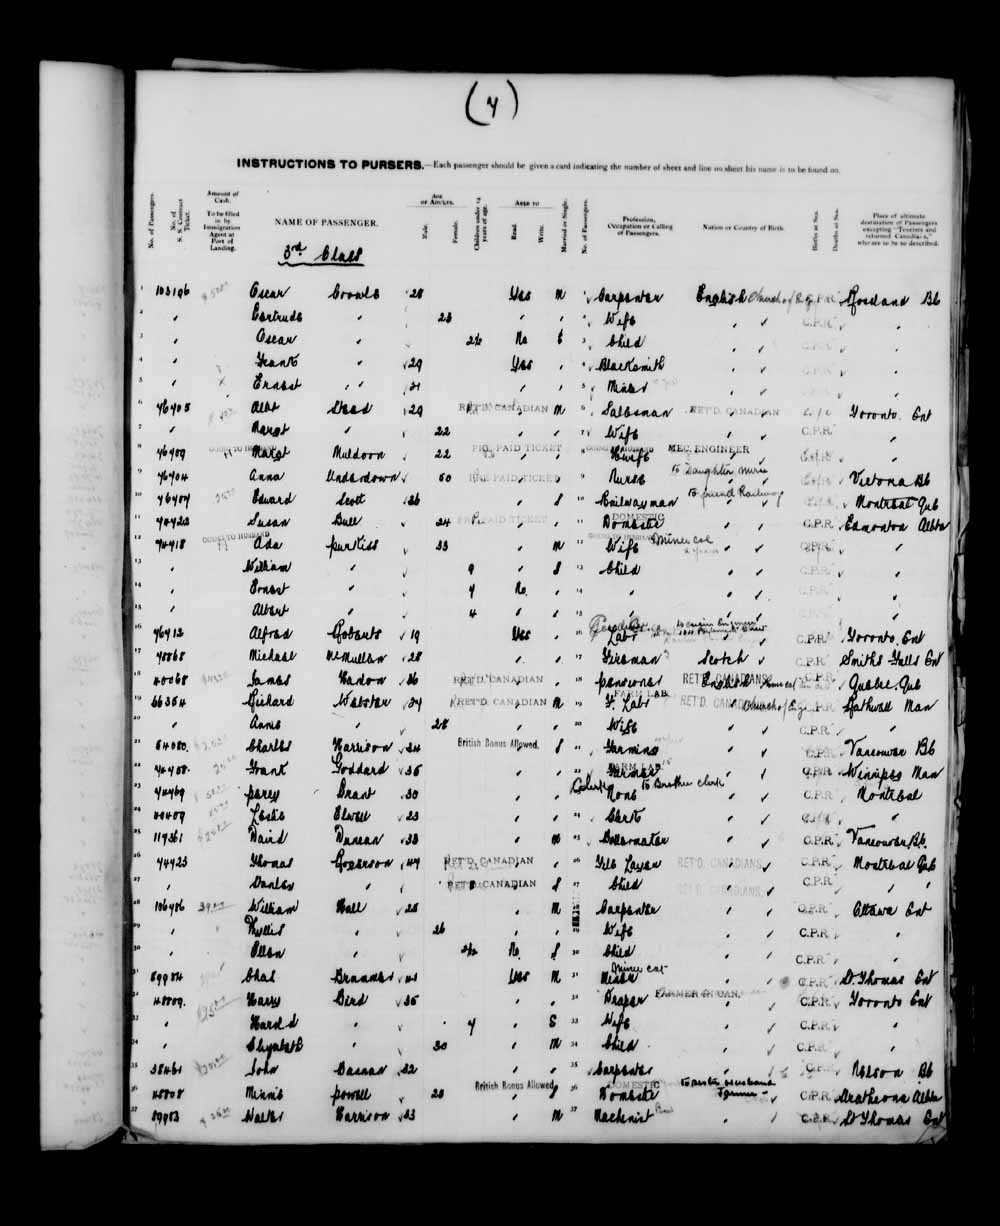 Digitized page of Quebec Passenger Lists for Image No.: e003591257